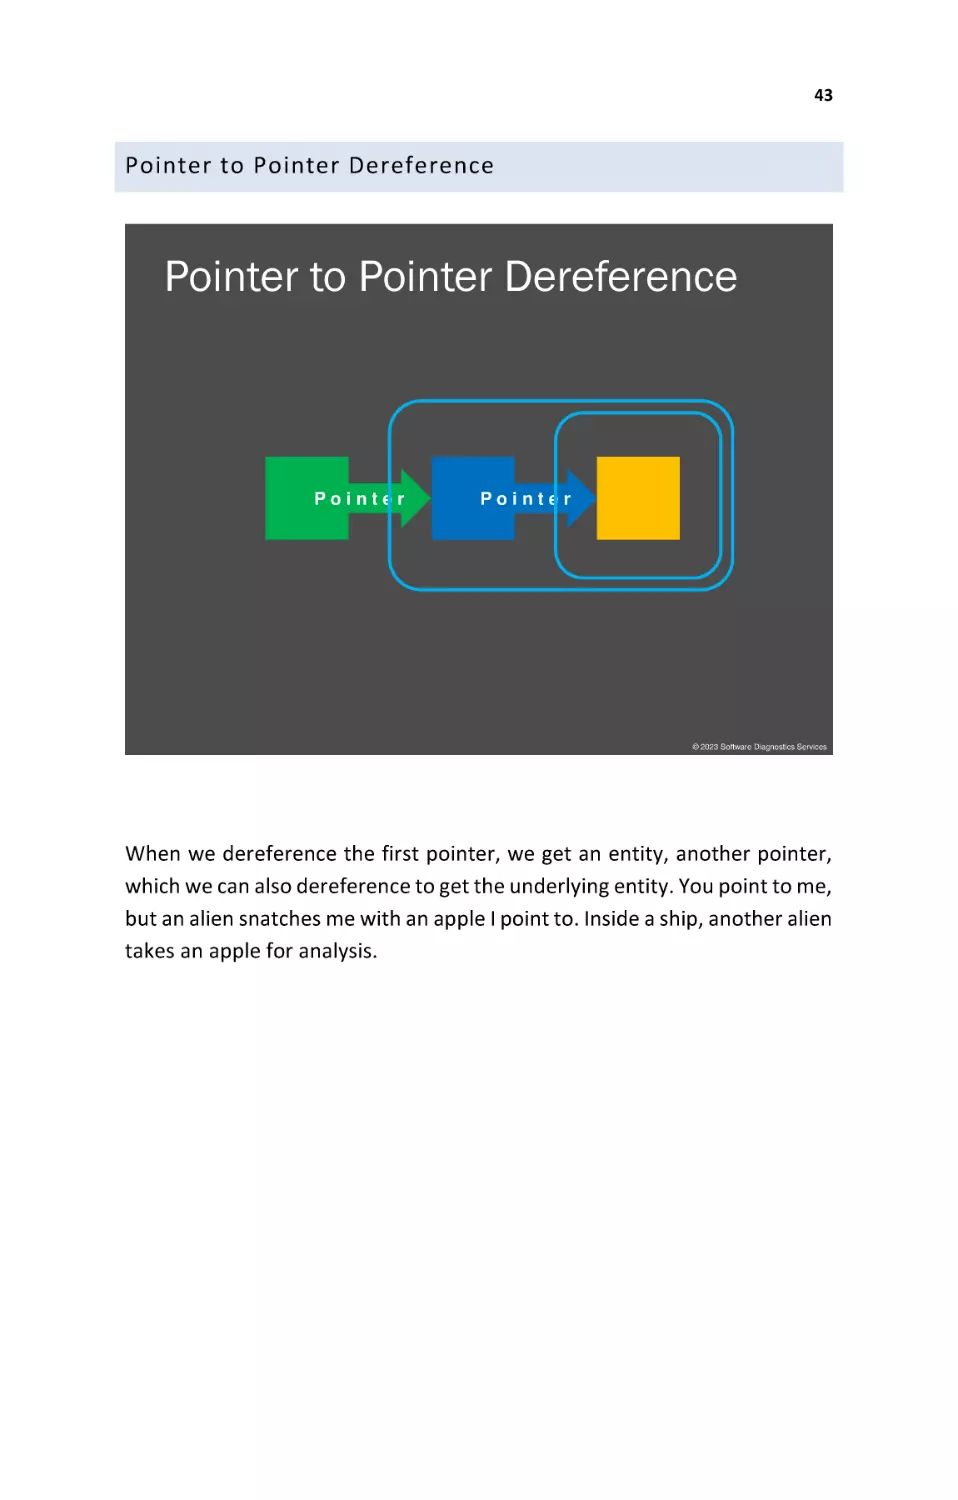 Pointer to Pointer Dereference